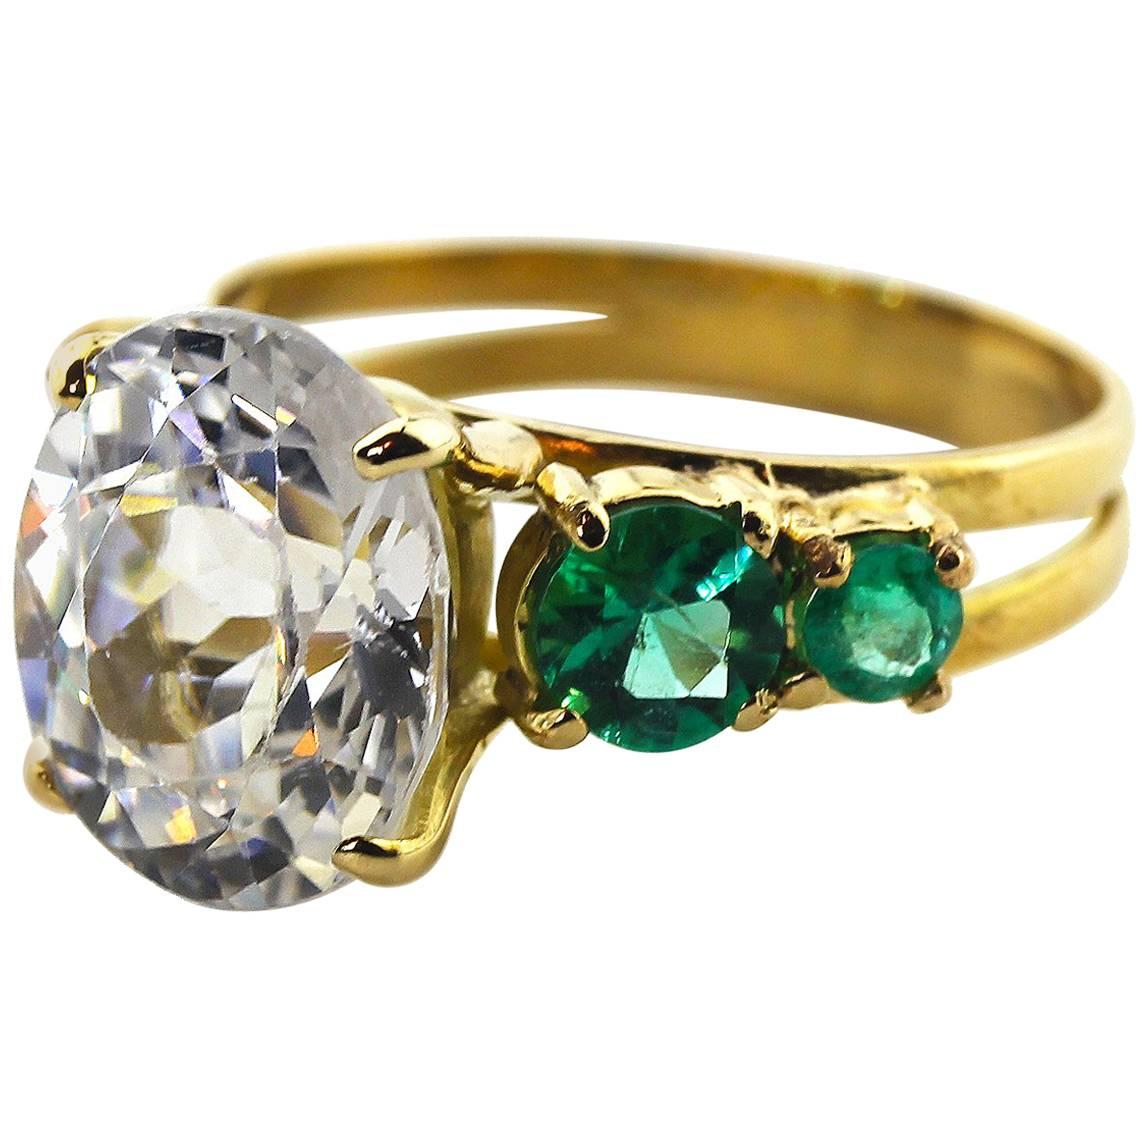 6.8 Carat White Zircon and Emerald 18Kt Yellow Gold Ring